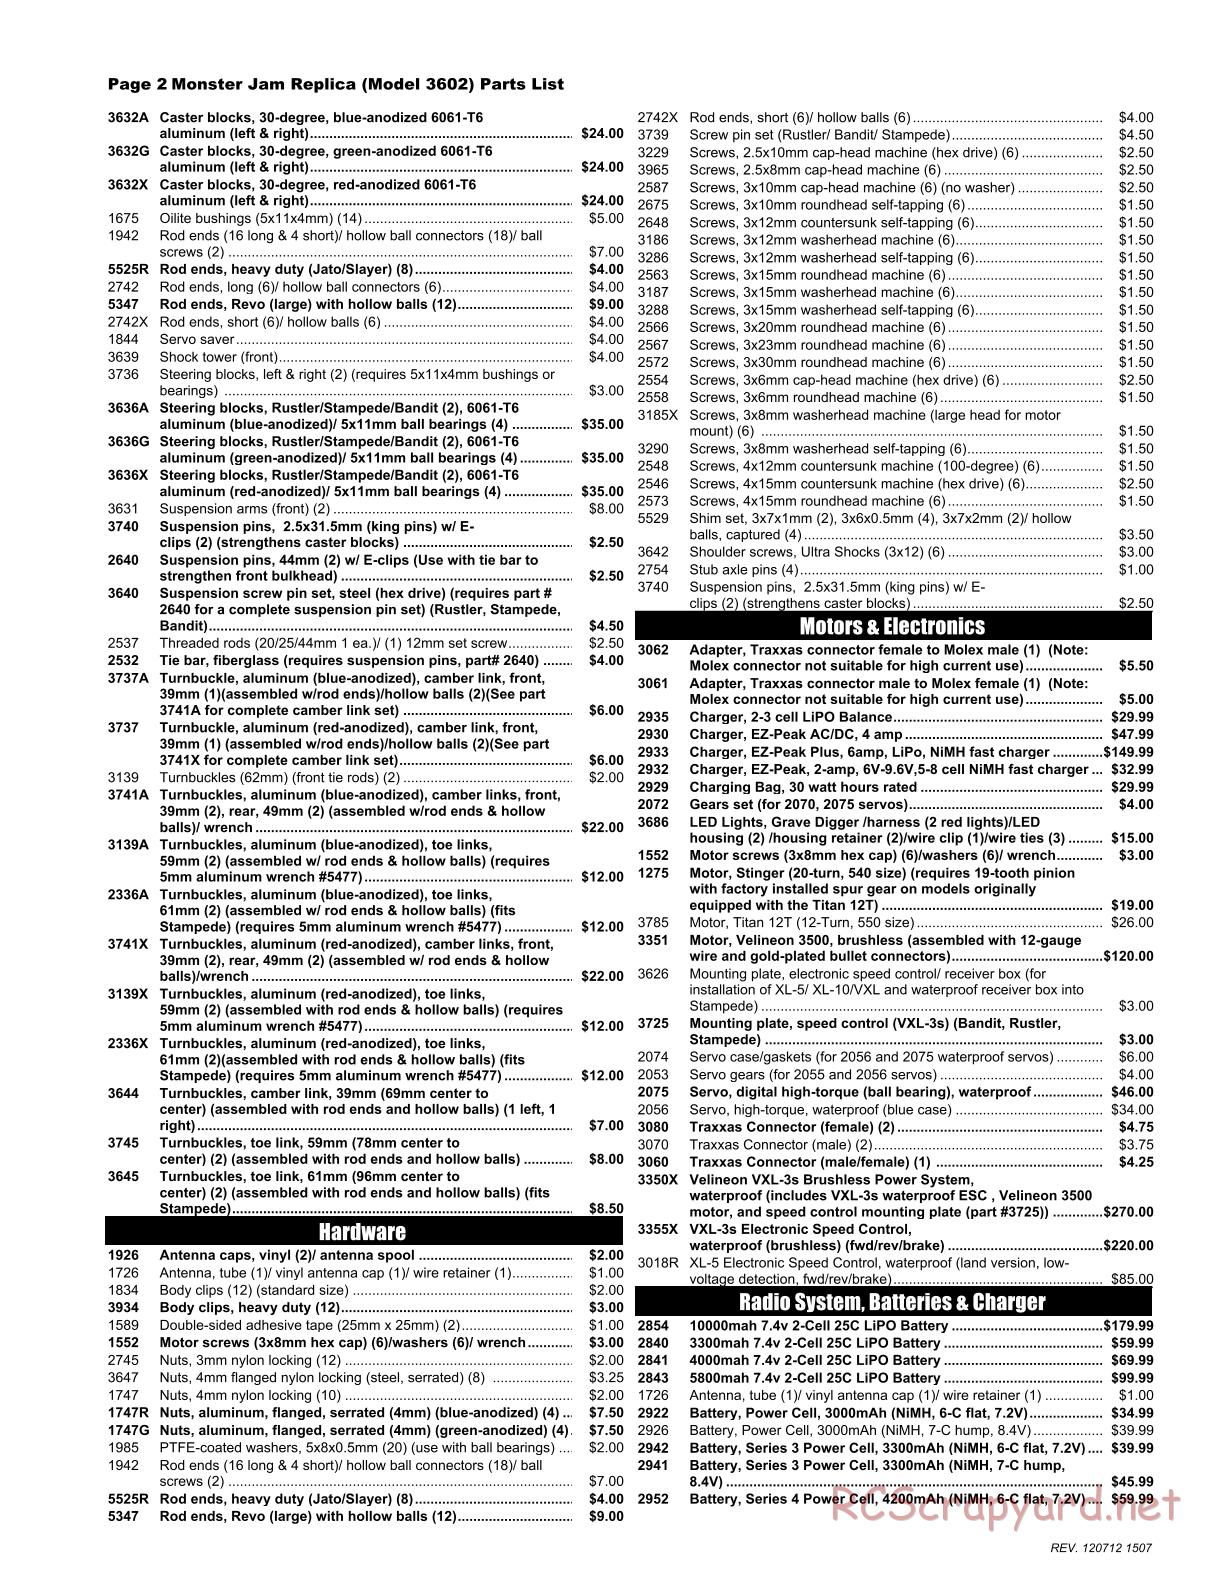 Traxxas - Monster Jam - Parts List - Page 2